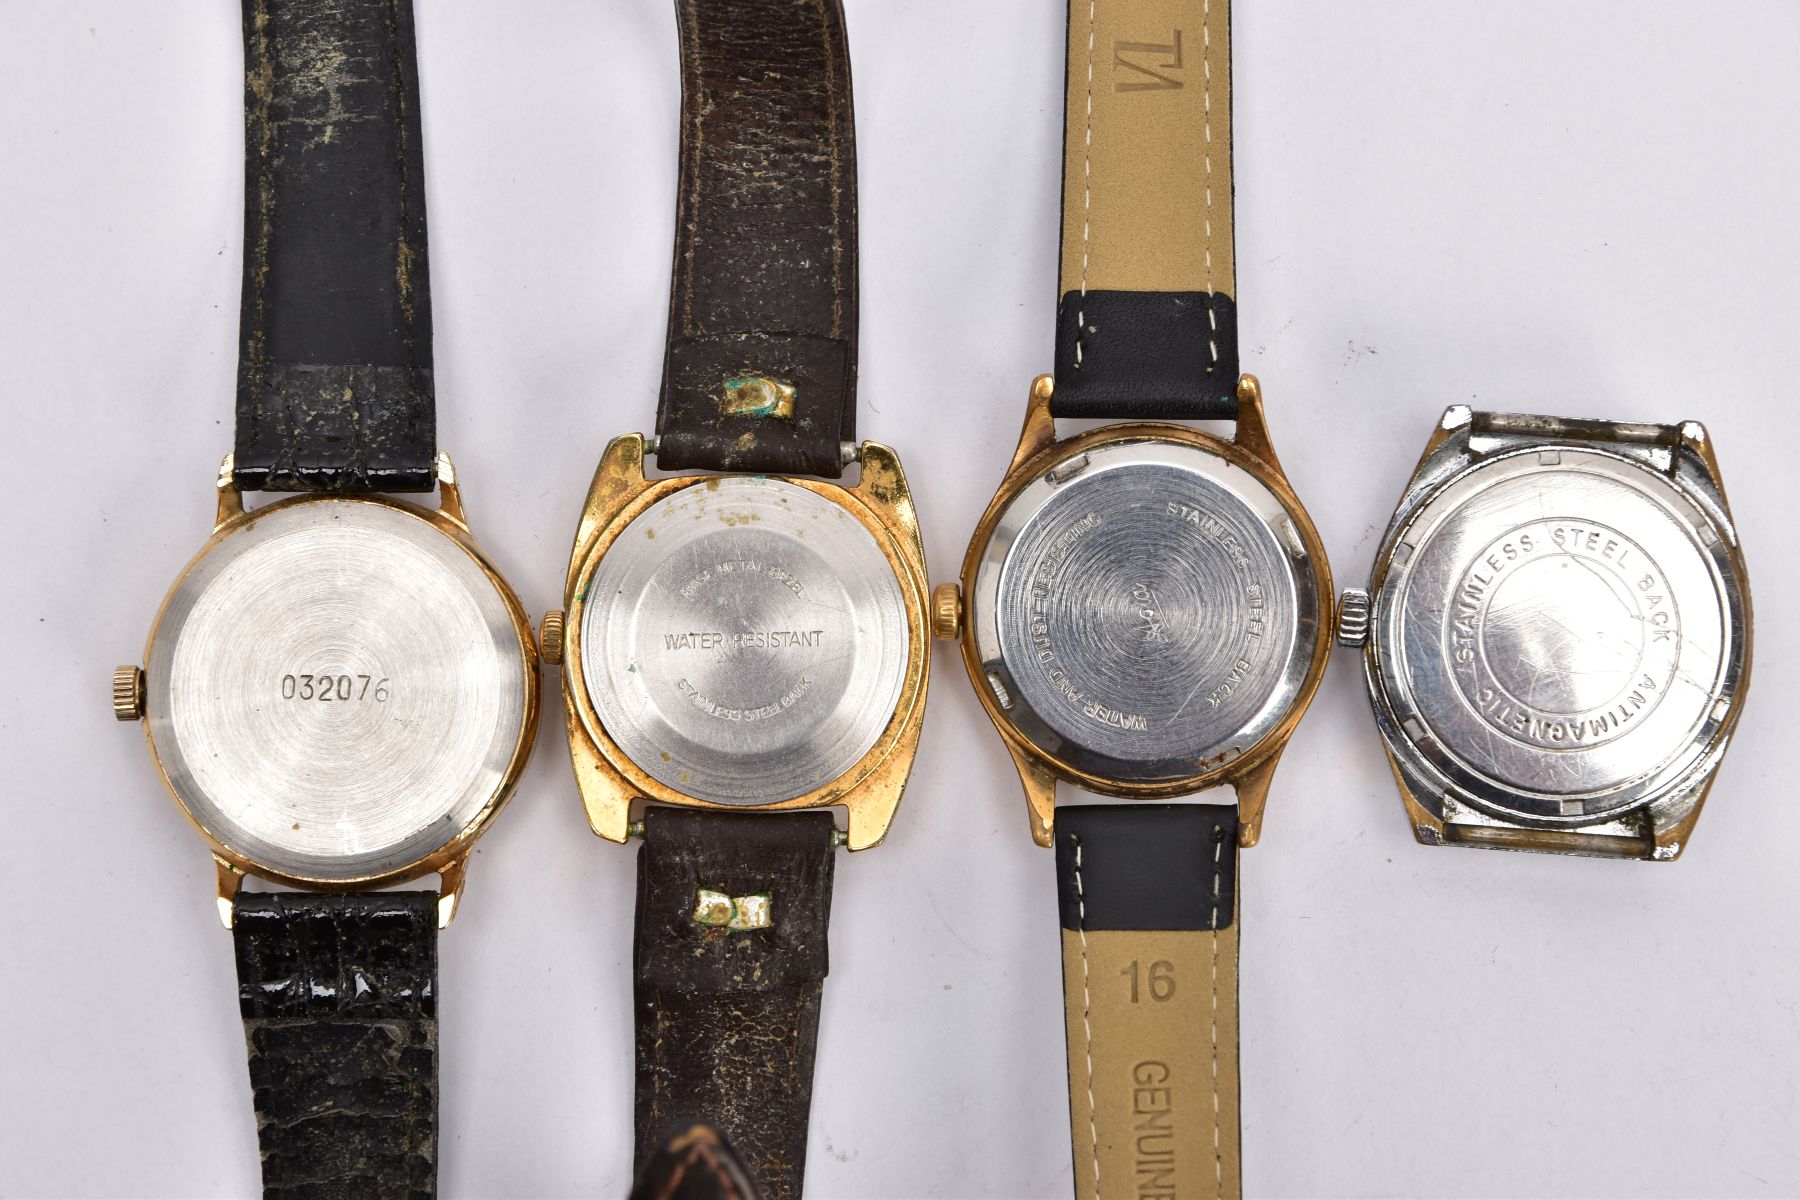 THREE GENTLEMAN'S WATCHES AND A WATCH HEAD, to include Sekonda, Avia, Timex and a Corvette watch - Image 4 of 4